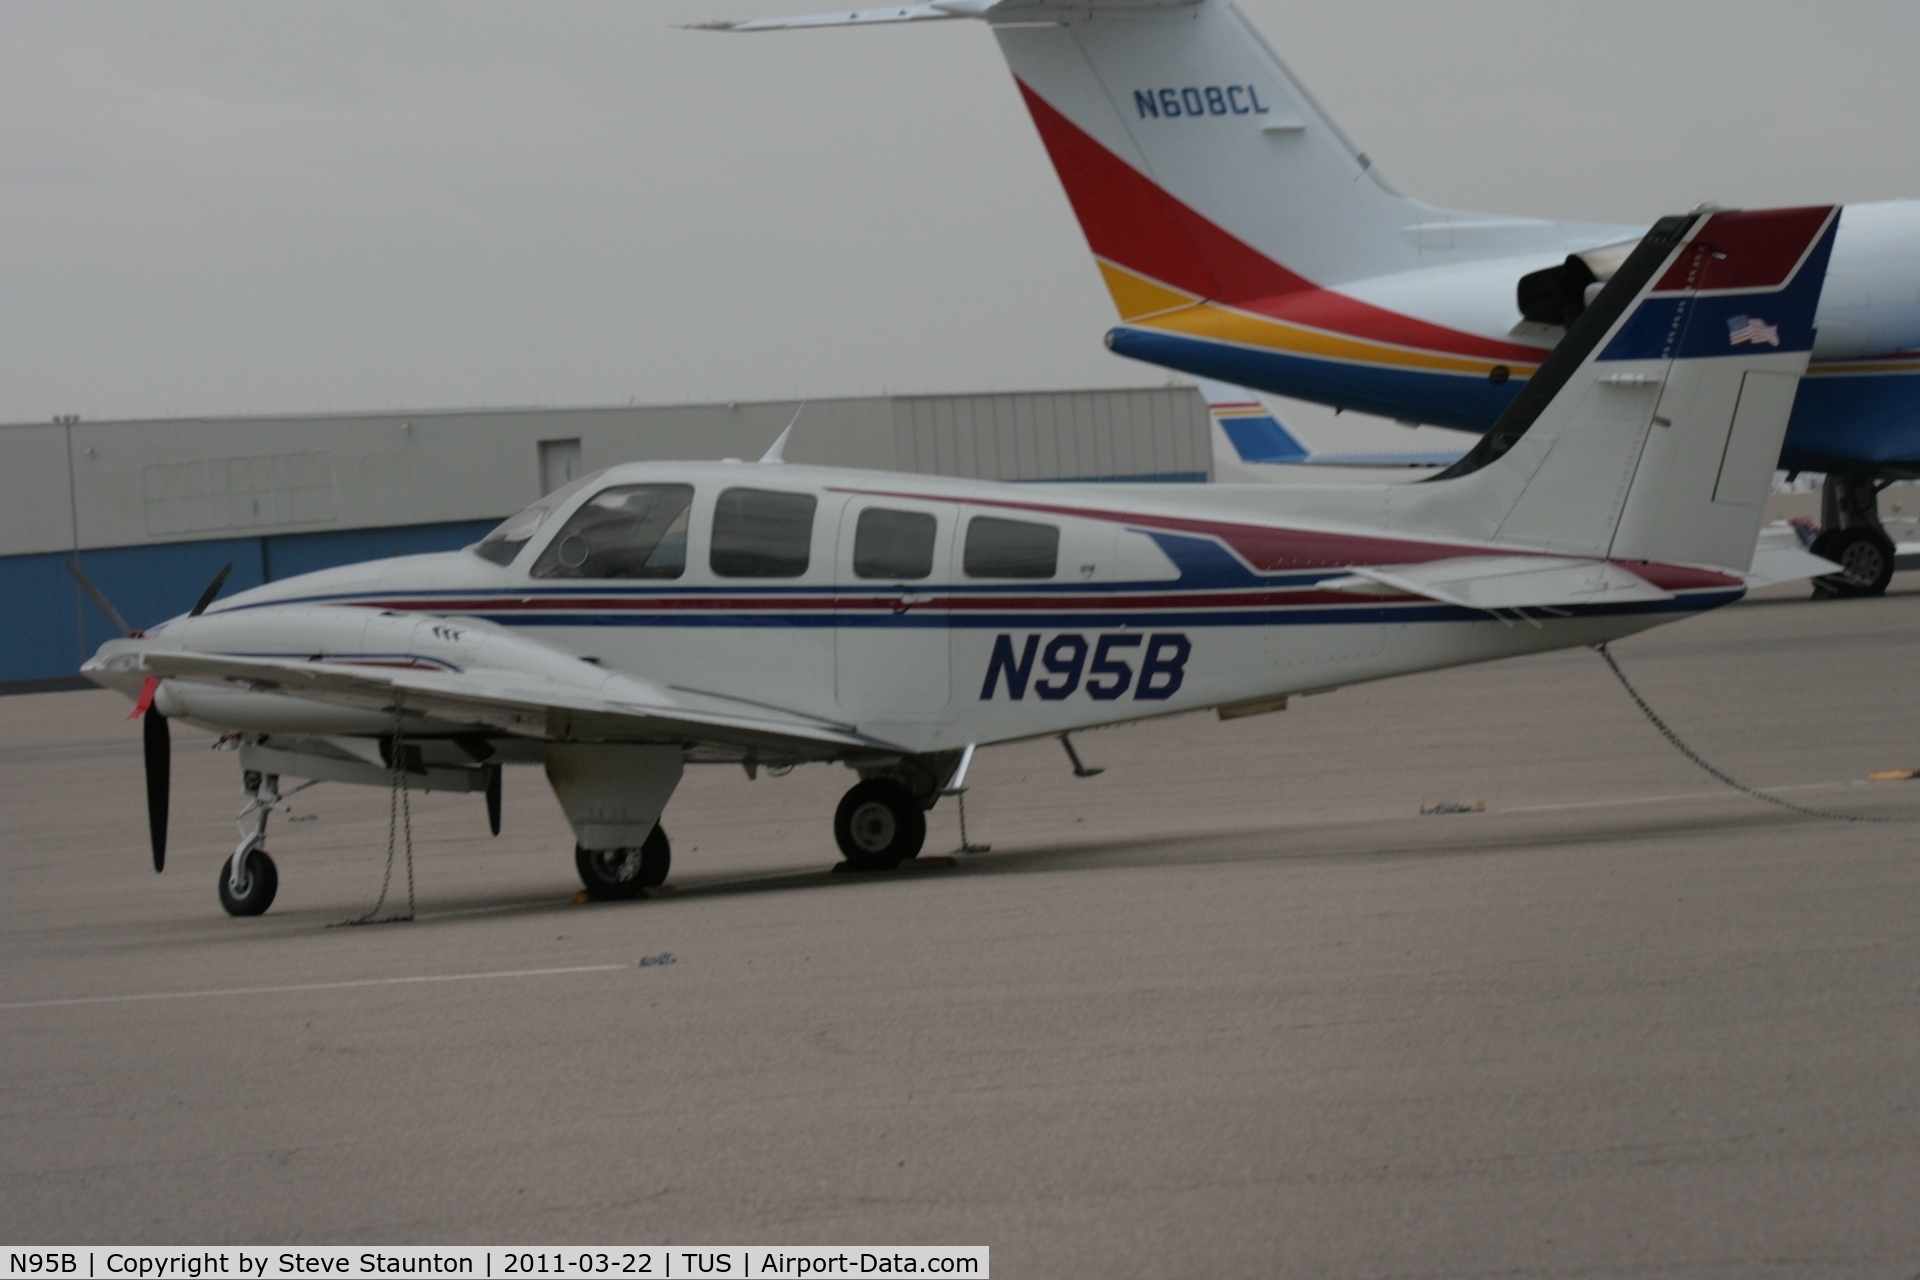 N95B, 1984 Beech 58P Baron C/N TJ-462, Taken at Tucson Airport, in March 2011 whilst on an Aeroprint Aviation tour